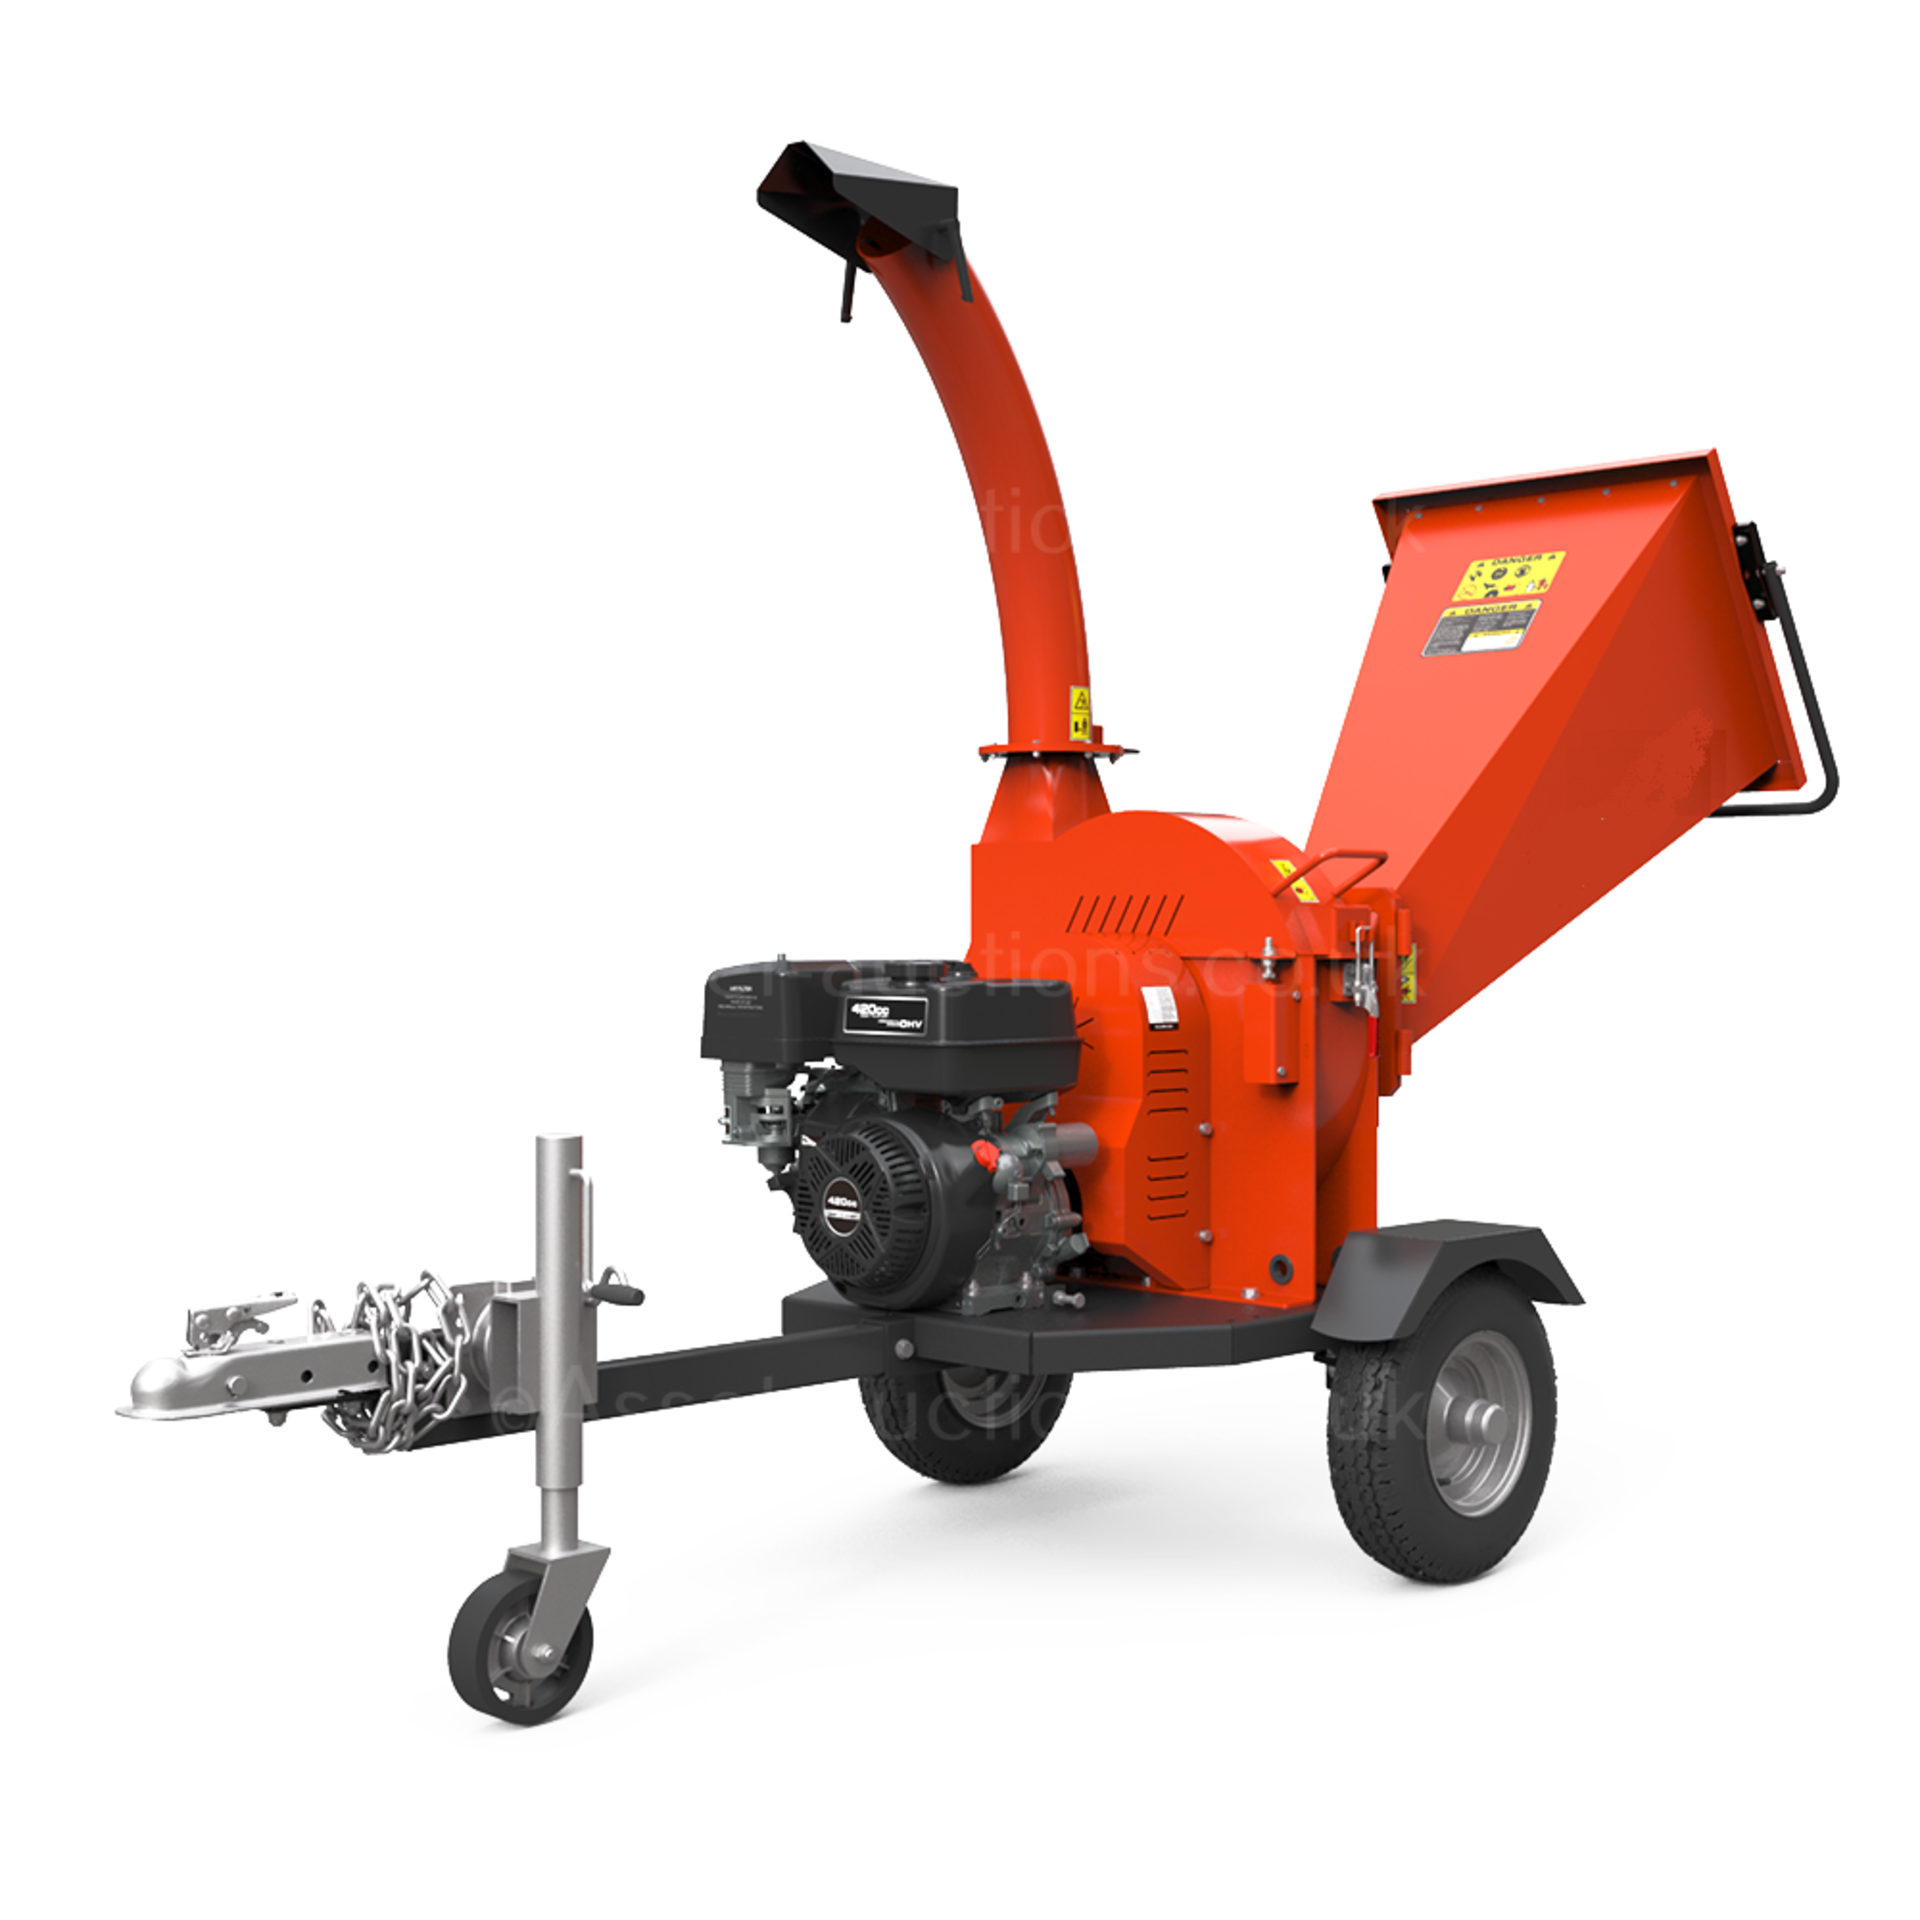 BRAND NEW AND UNUSED DGS1500 420CC 4.5” TOWABLE PETROL WOOD CHIPPER *PLUS VAT* - Image 8 of 11